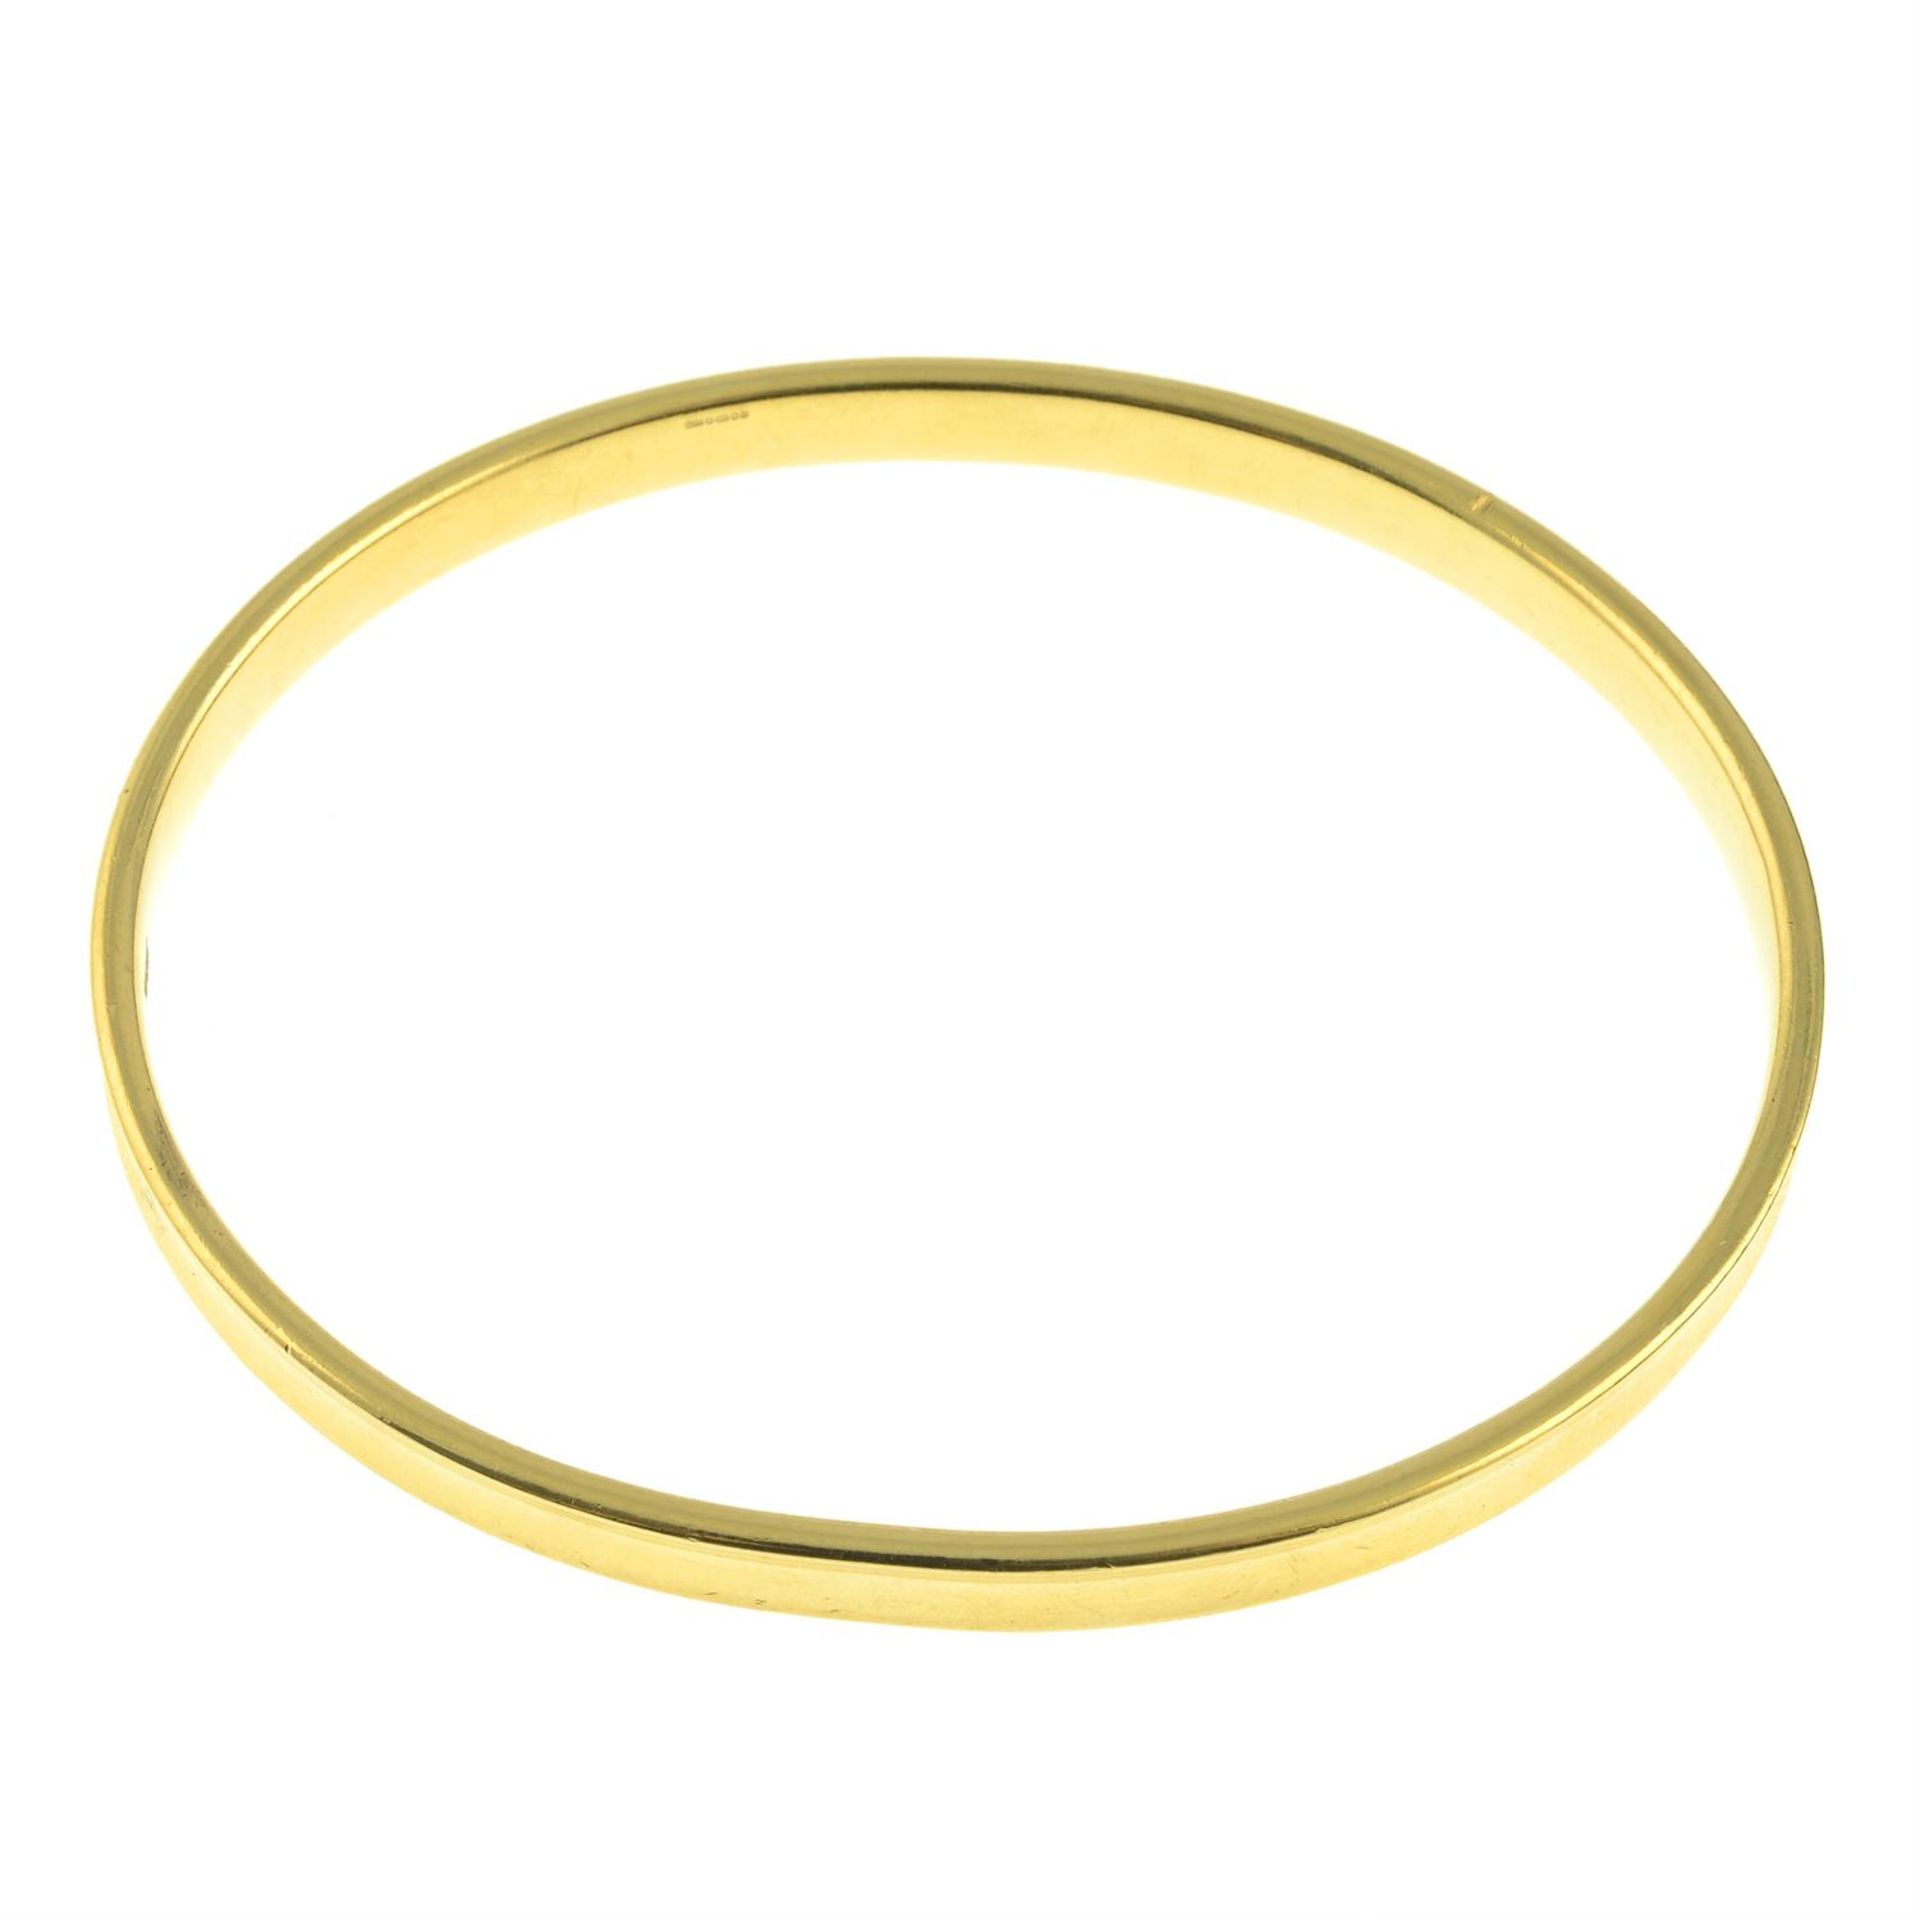 An '1837' bangle, by Tiffany & Co. - Image 3 of 4